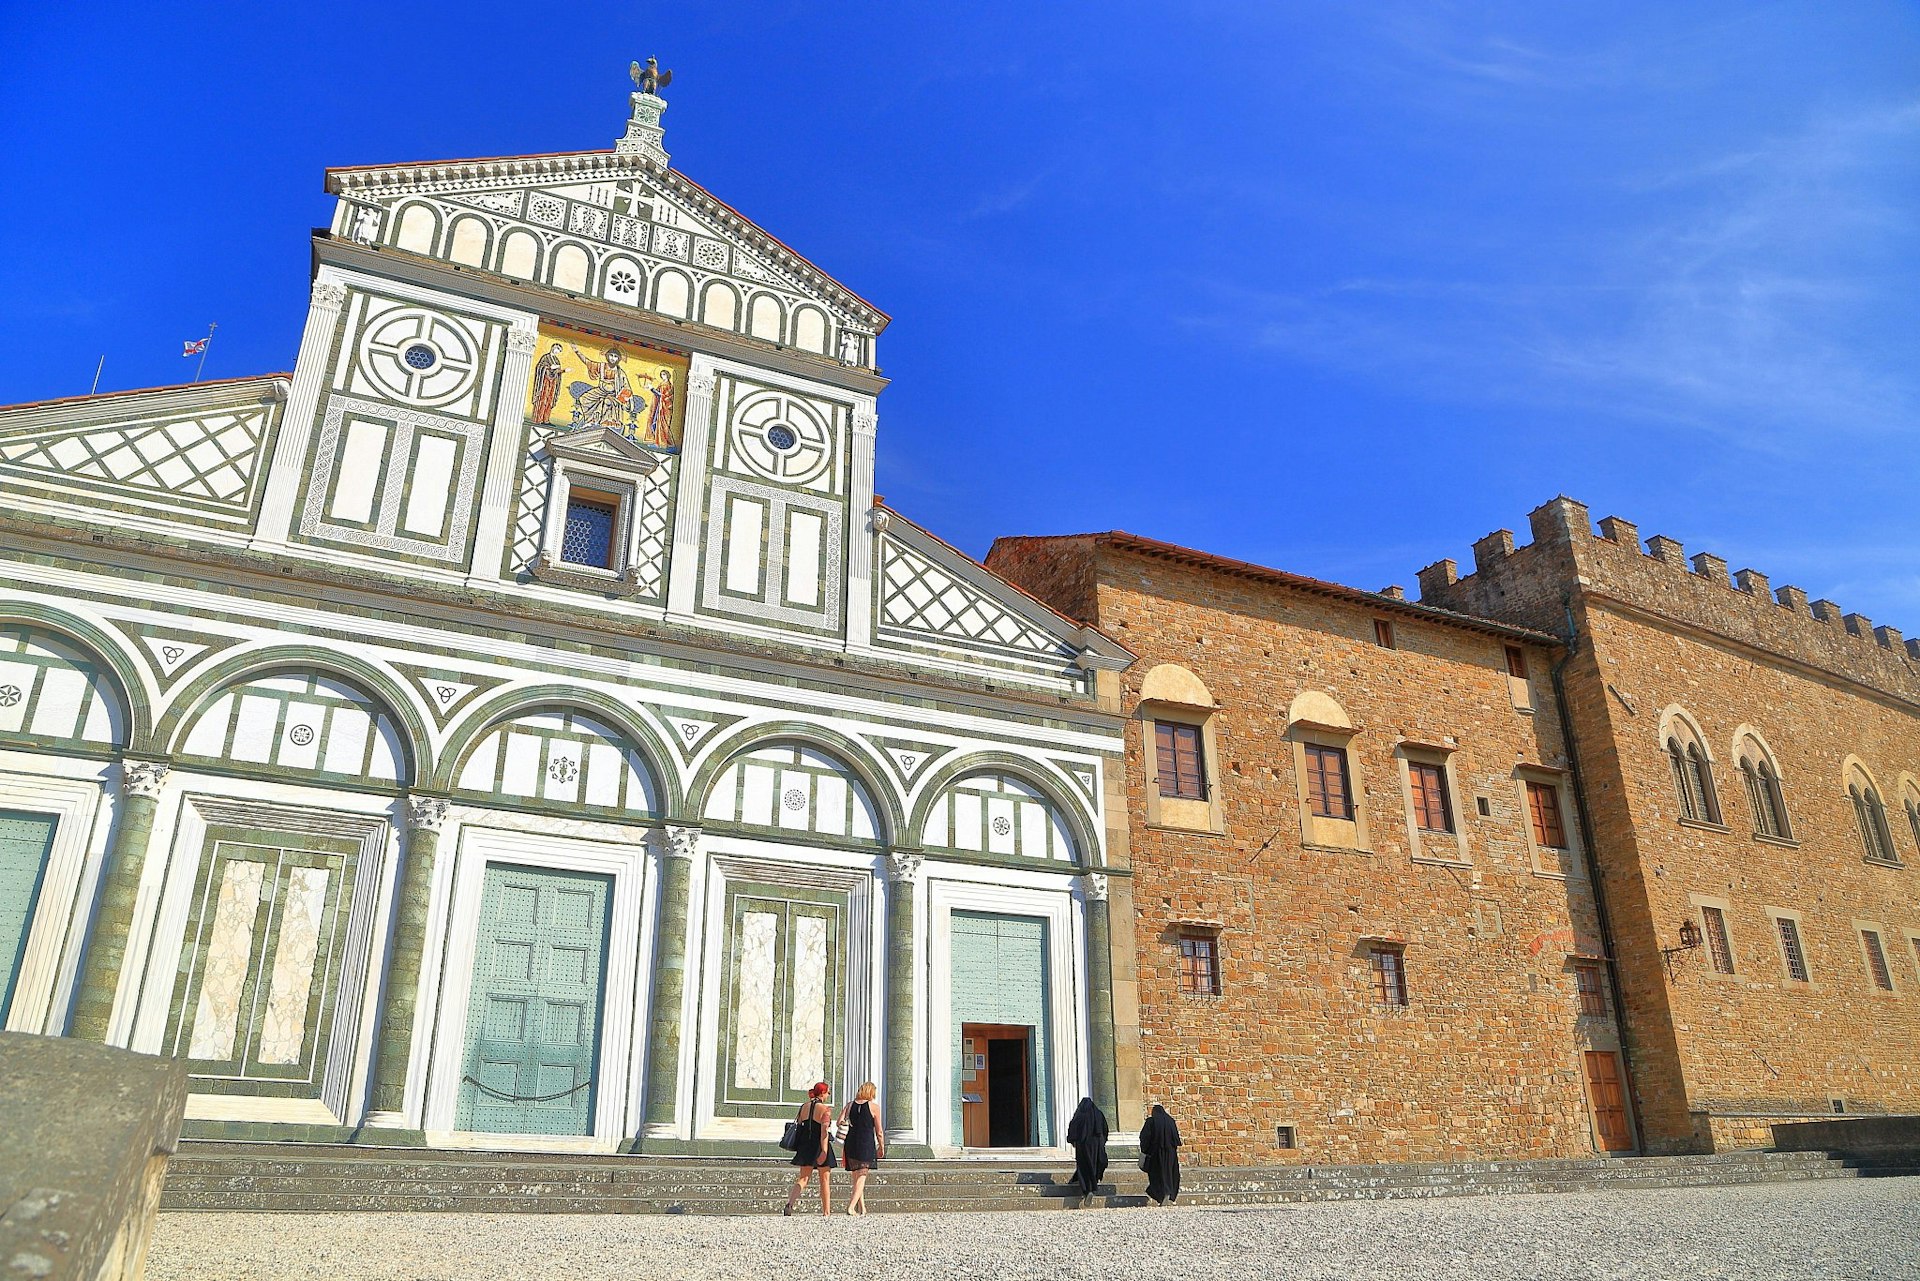 Two pairs of women - visitors in black dresses and nuns in habits - walking outside Florence's Basilica di San Miniato al Monte Florence, a church with an intricate multicoloured marble facade. 